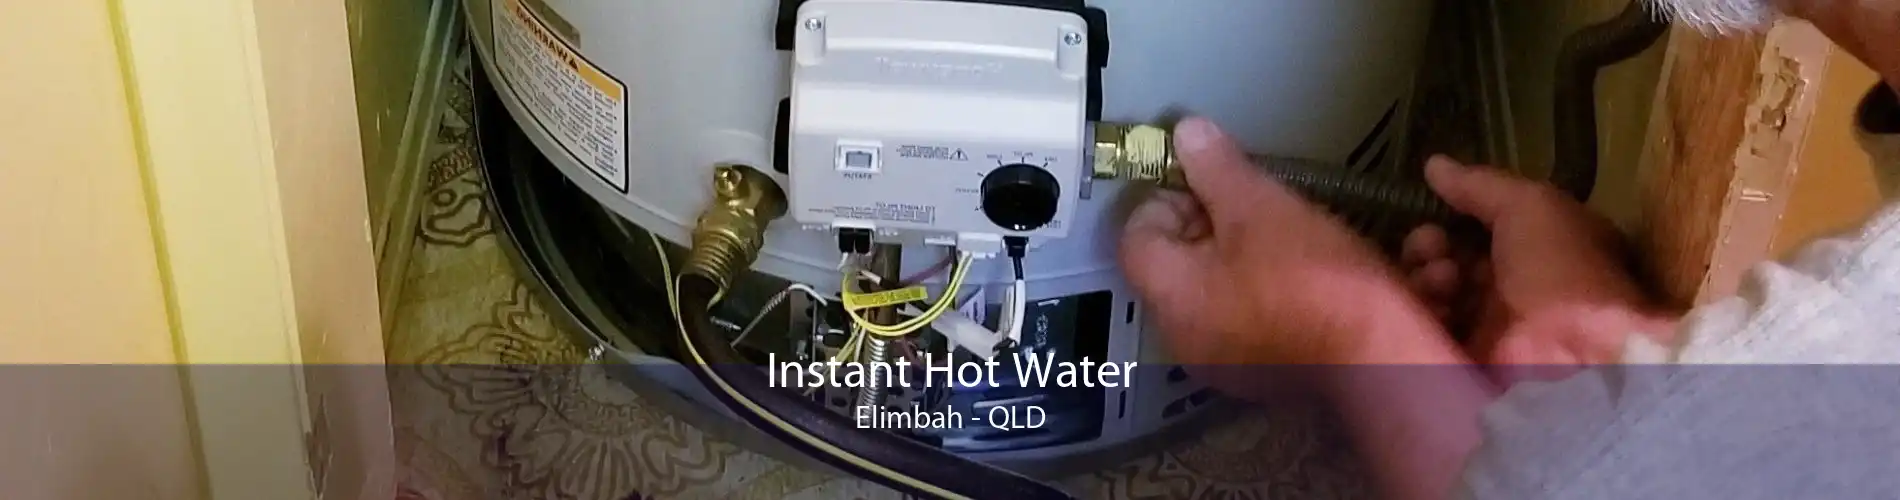 Instant Hot Water Elimbah - QLD